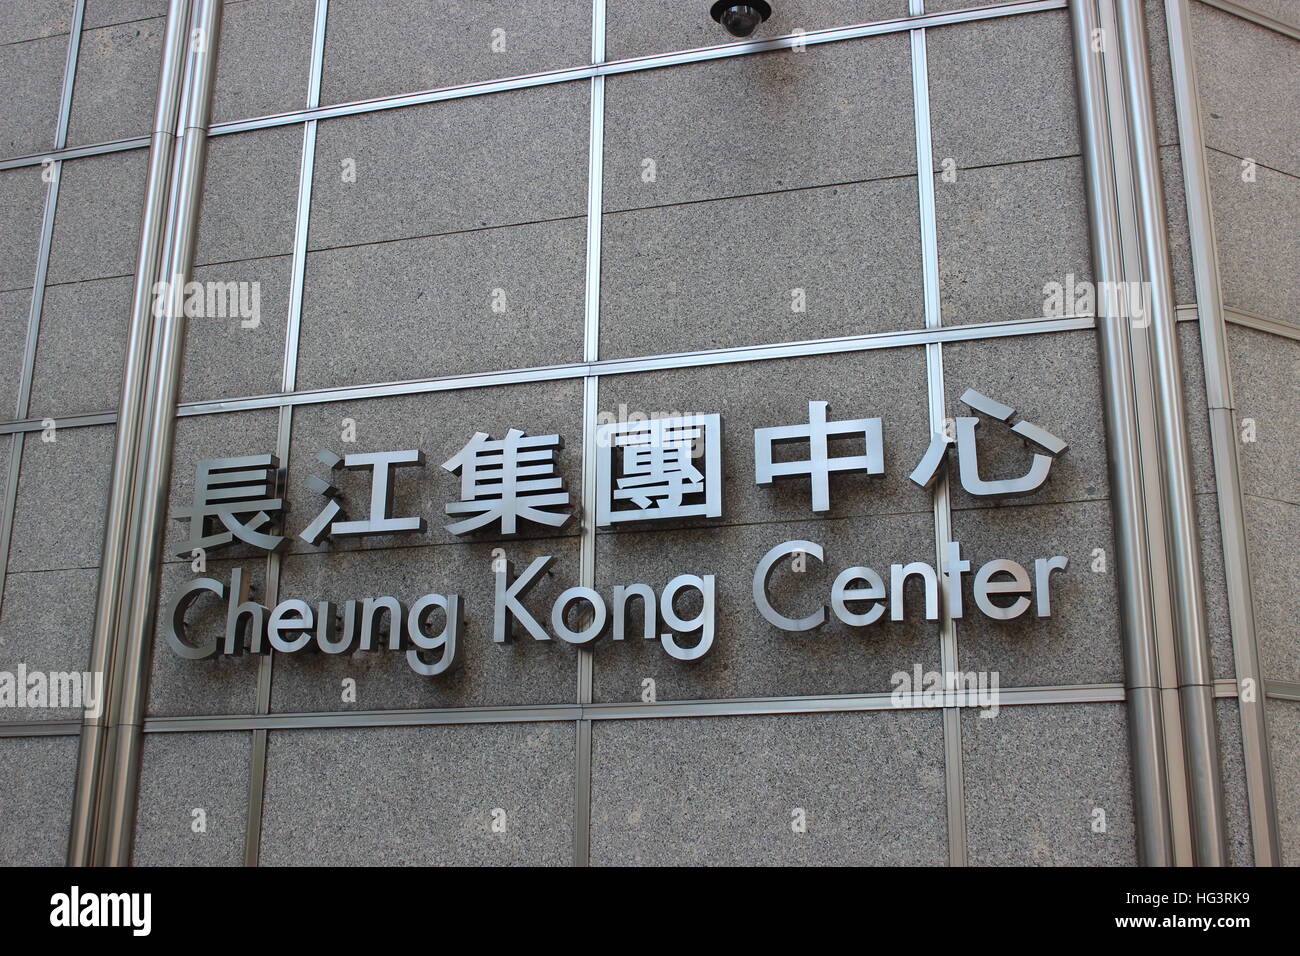 Outside the Cheung Kong Center in Central, Hong Kong Stock Photo